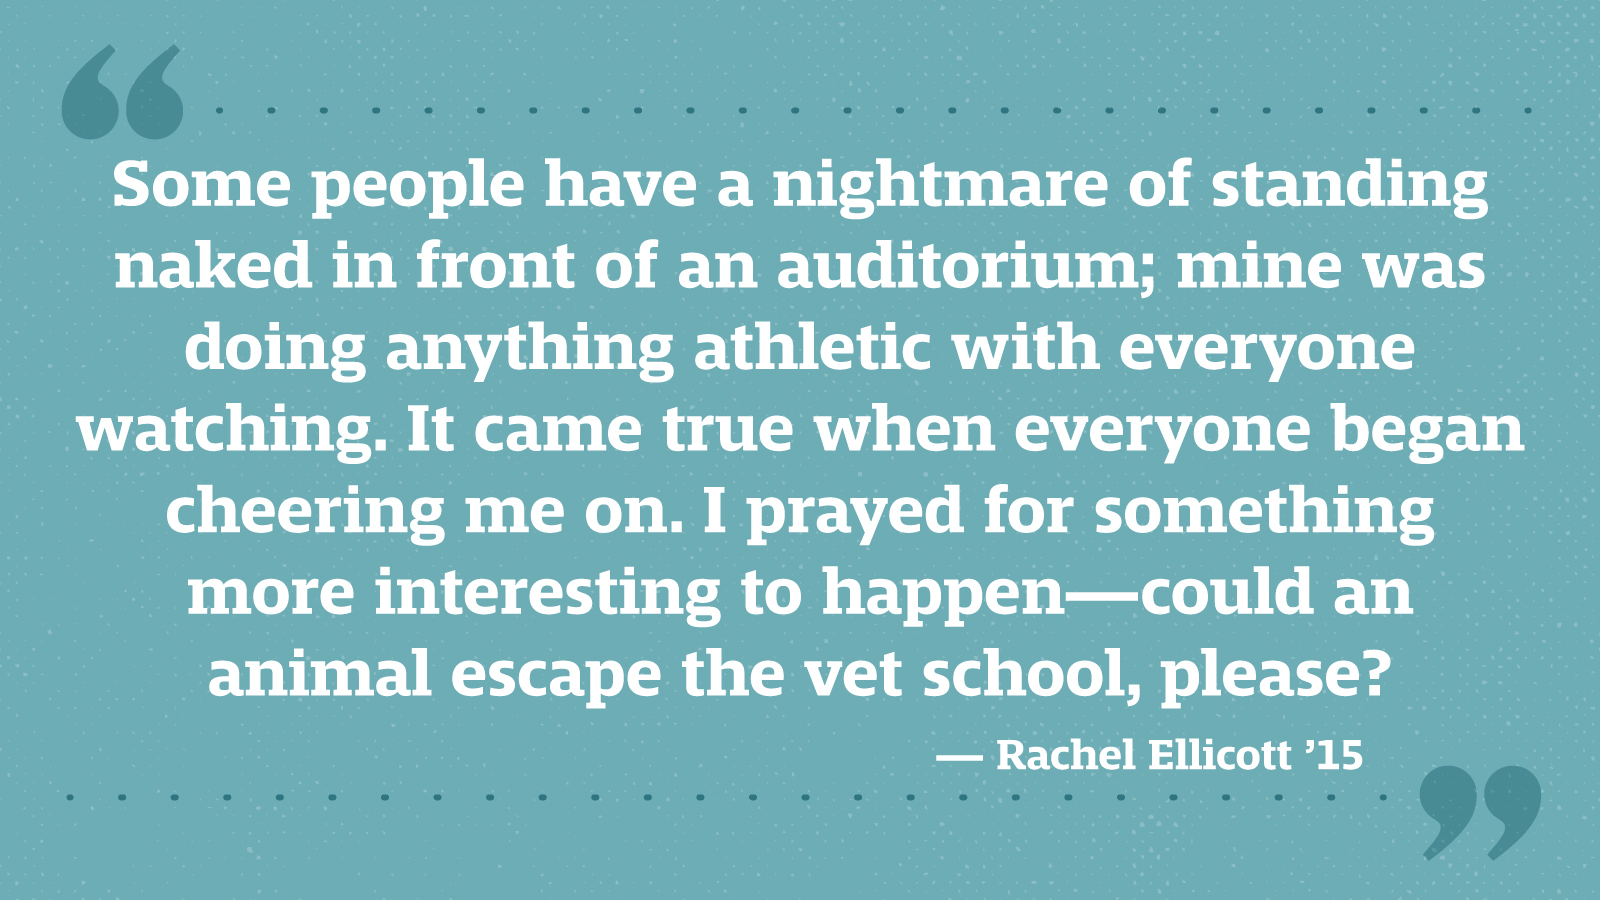 Some people have a nightmare of standing naked in front of an auditorium; mine was doing anything athletic with everyone watching. It came true when everyone began cheering me on. I prayed for something more interesting to happen—could an animal escape the vet school, please? — Rachel Ellicott ’15